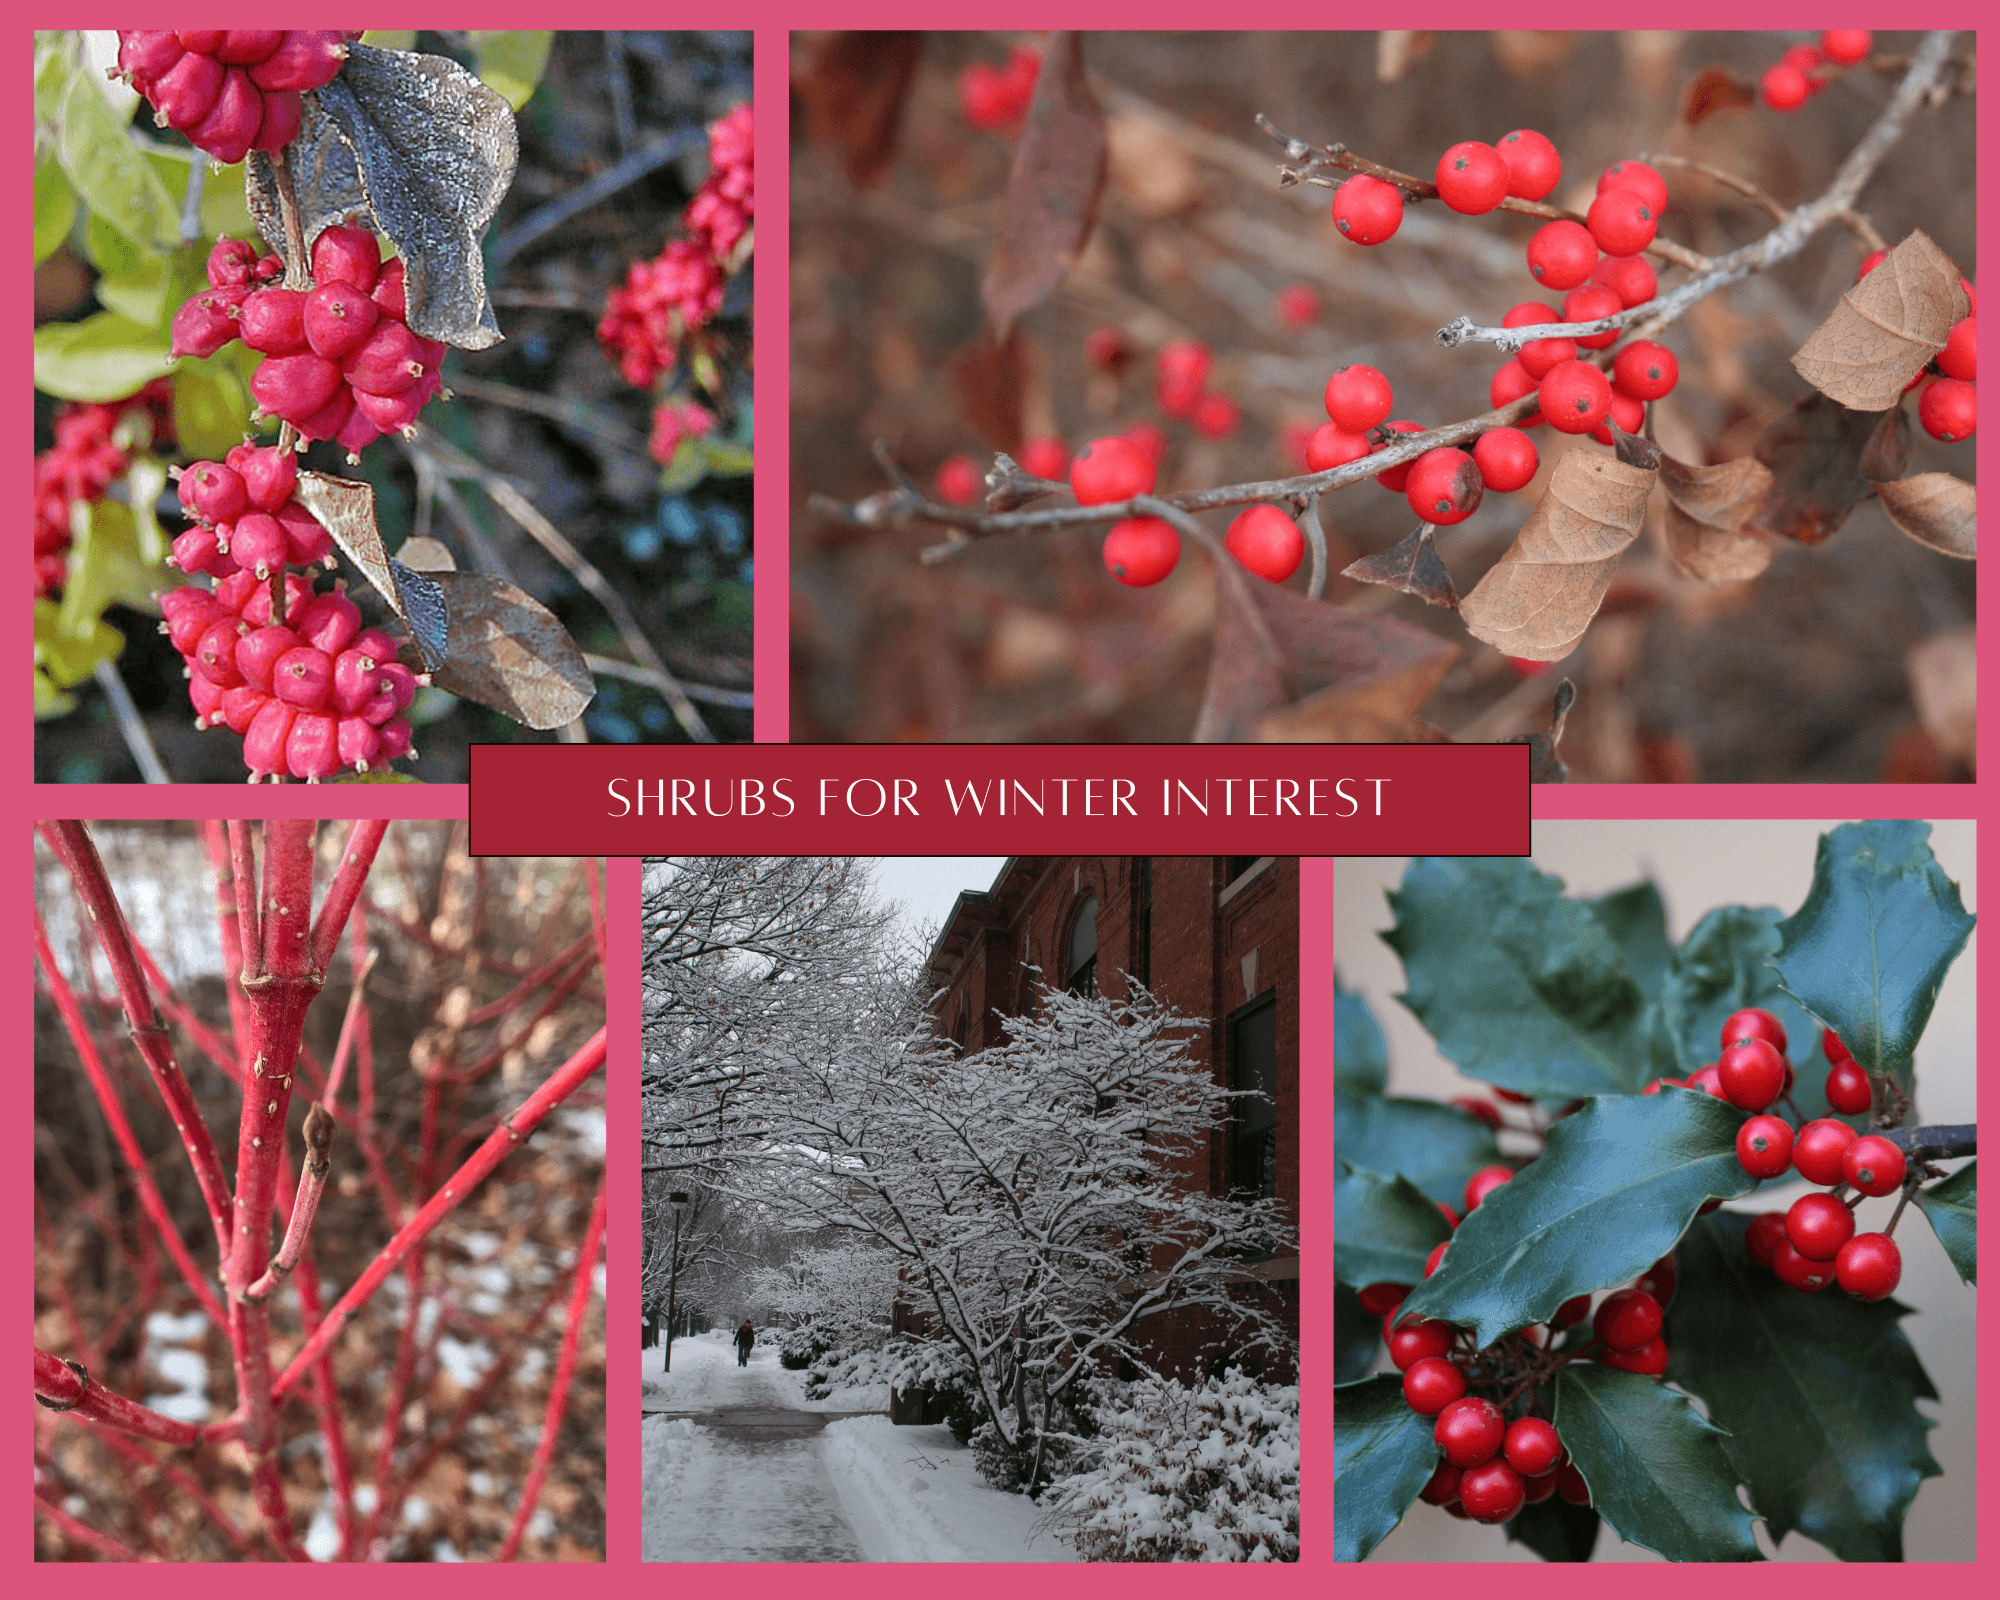 Five shrubs to add winter color and interest to your yard. 